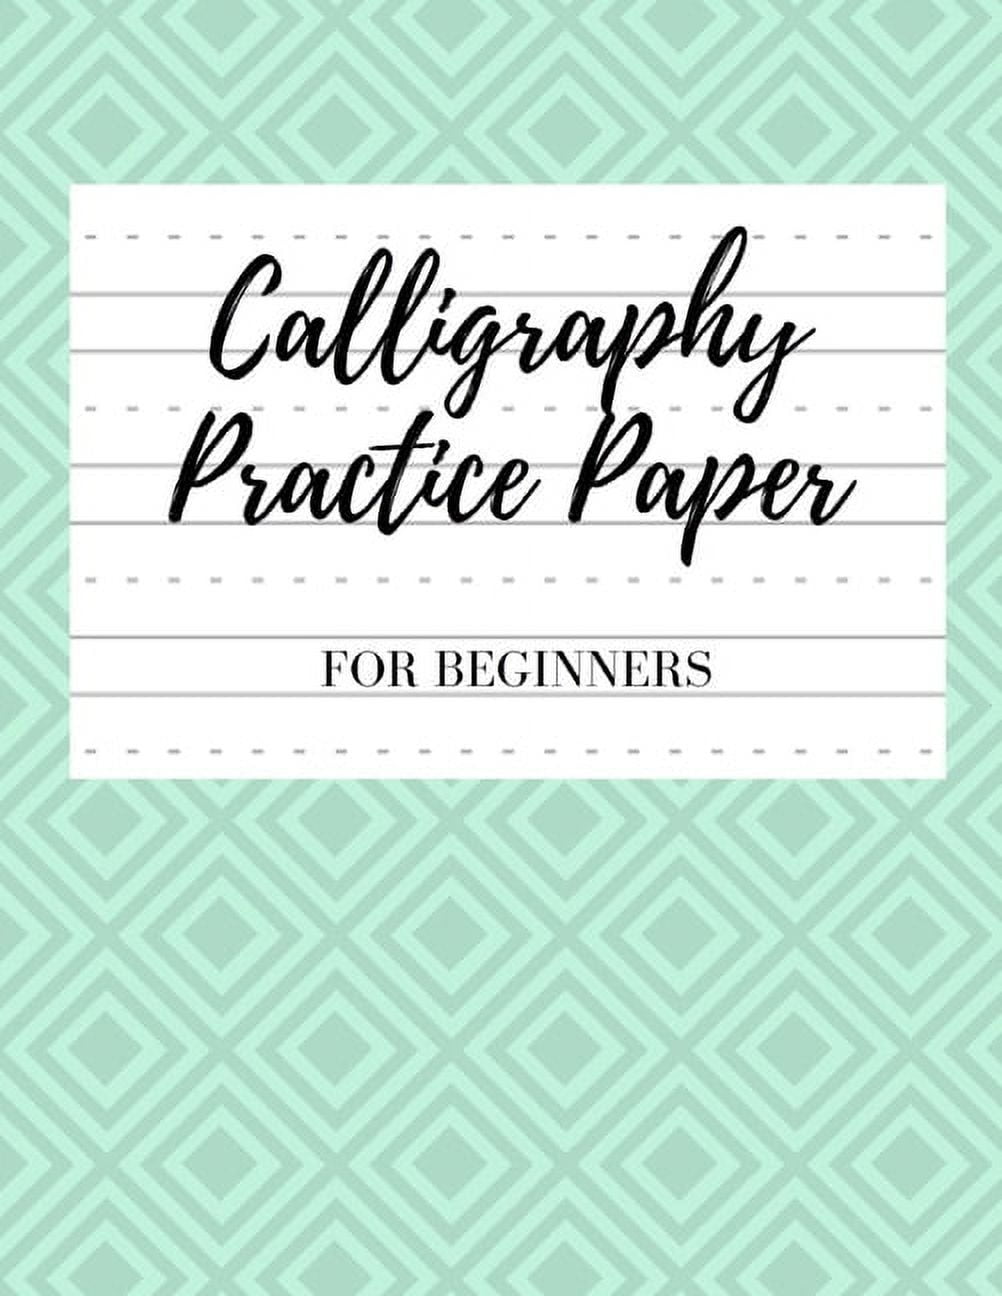 Calligraphy Paper for Beginners : Modern Calligraphy Practice Sheets - 100  sheets, Nifty Hand Lettering Practice Notepad, Calligraphy Parchment Paper